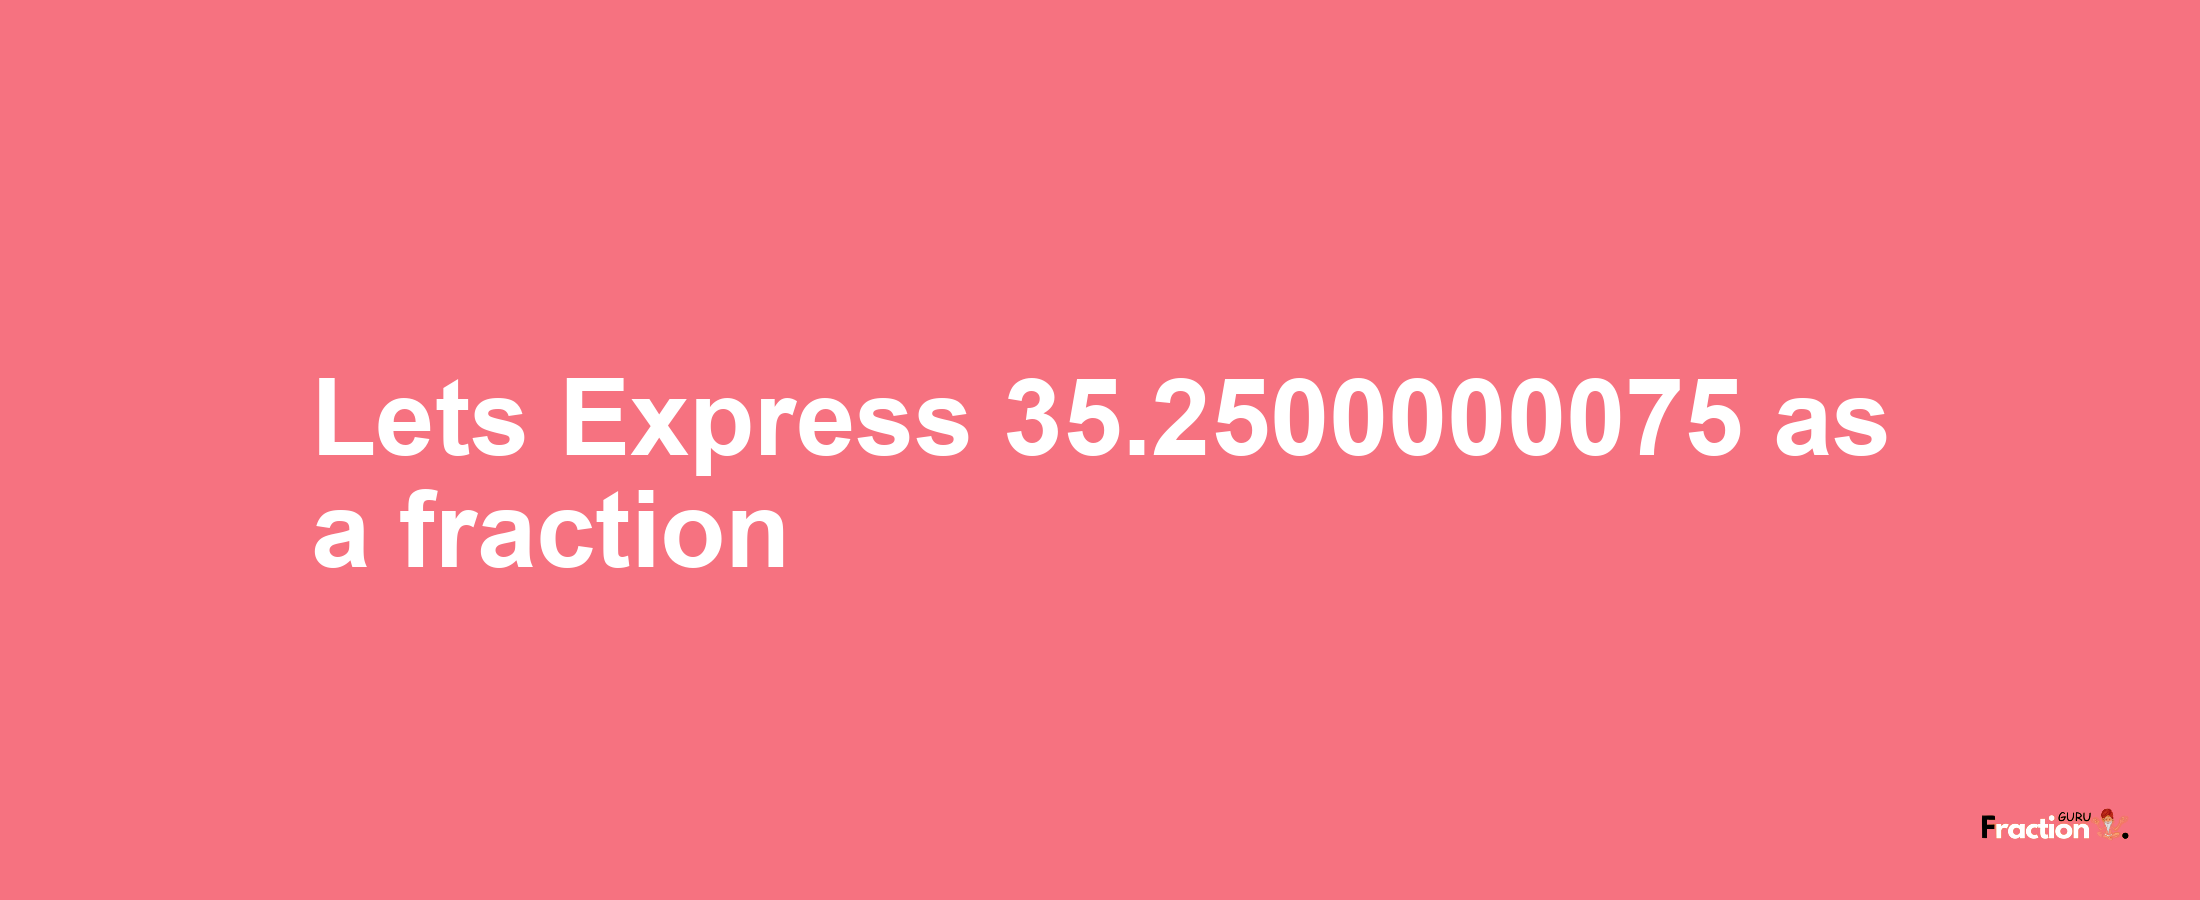 Lets Express 35.2500000075 as afraction